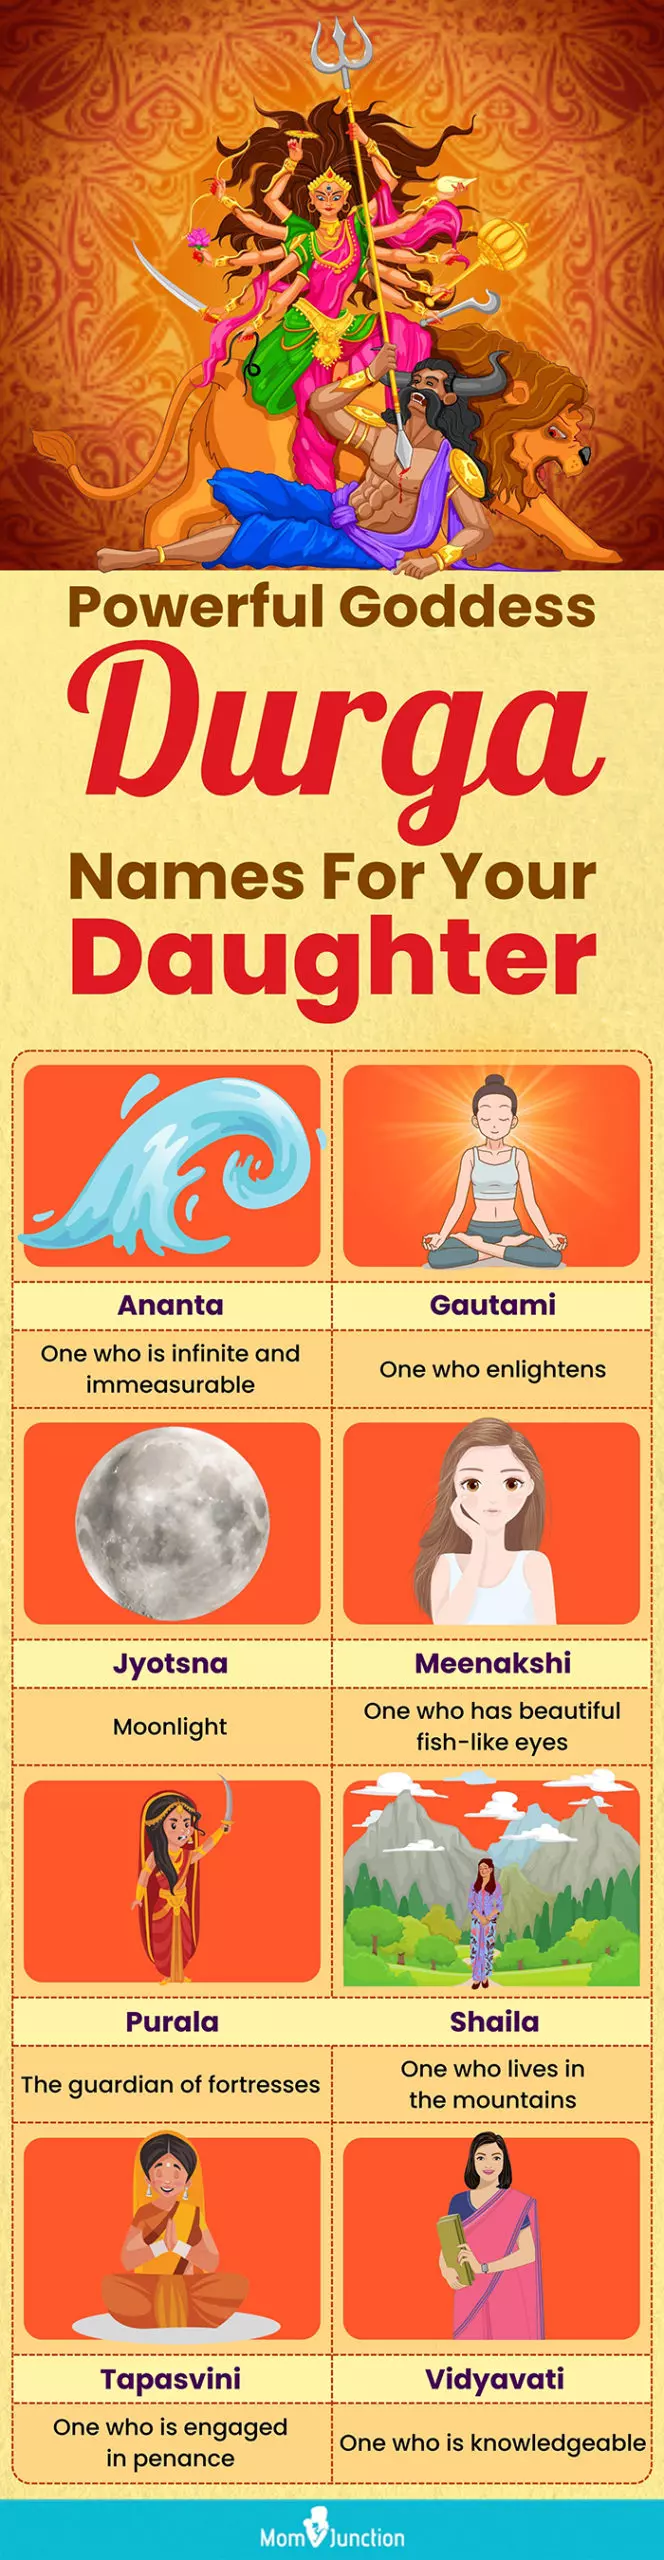 powerful goddess durga names for your daughter (infographic)